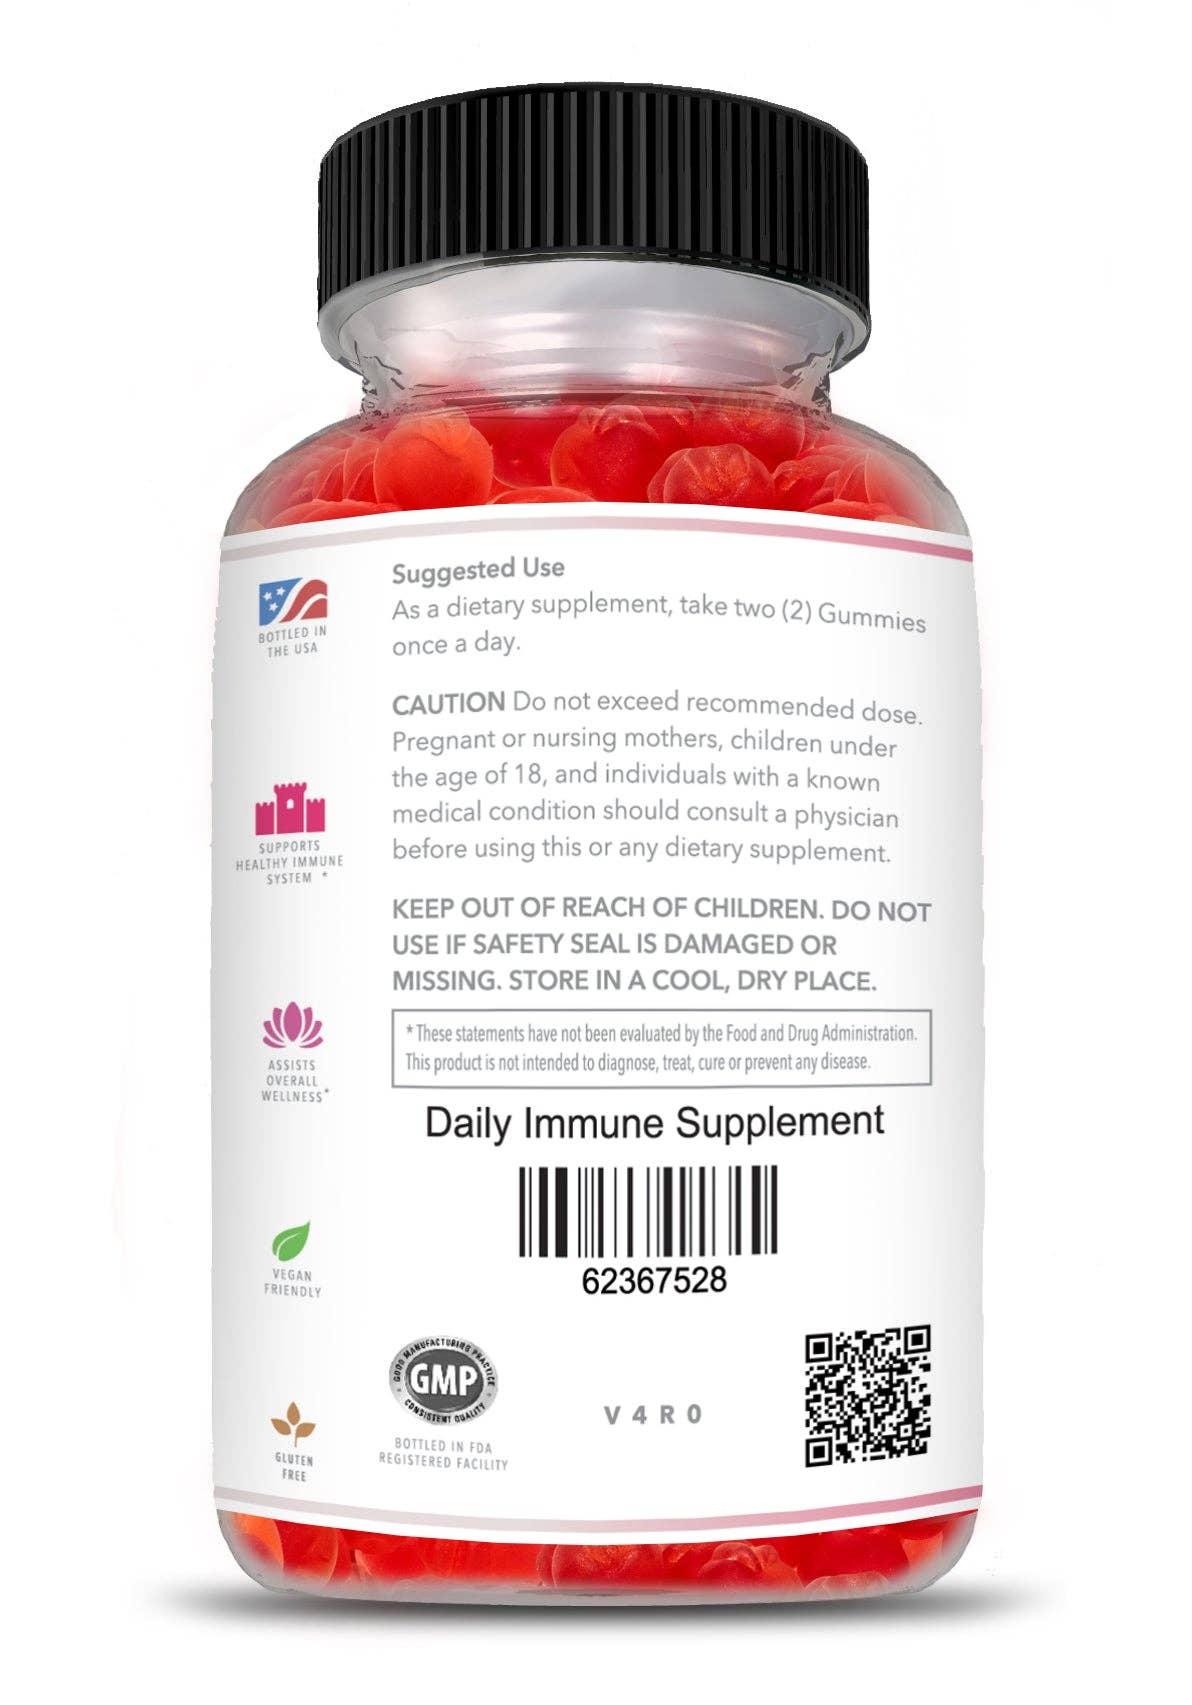 Infinity Supplements - Daily Immune Supplement